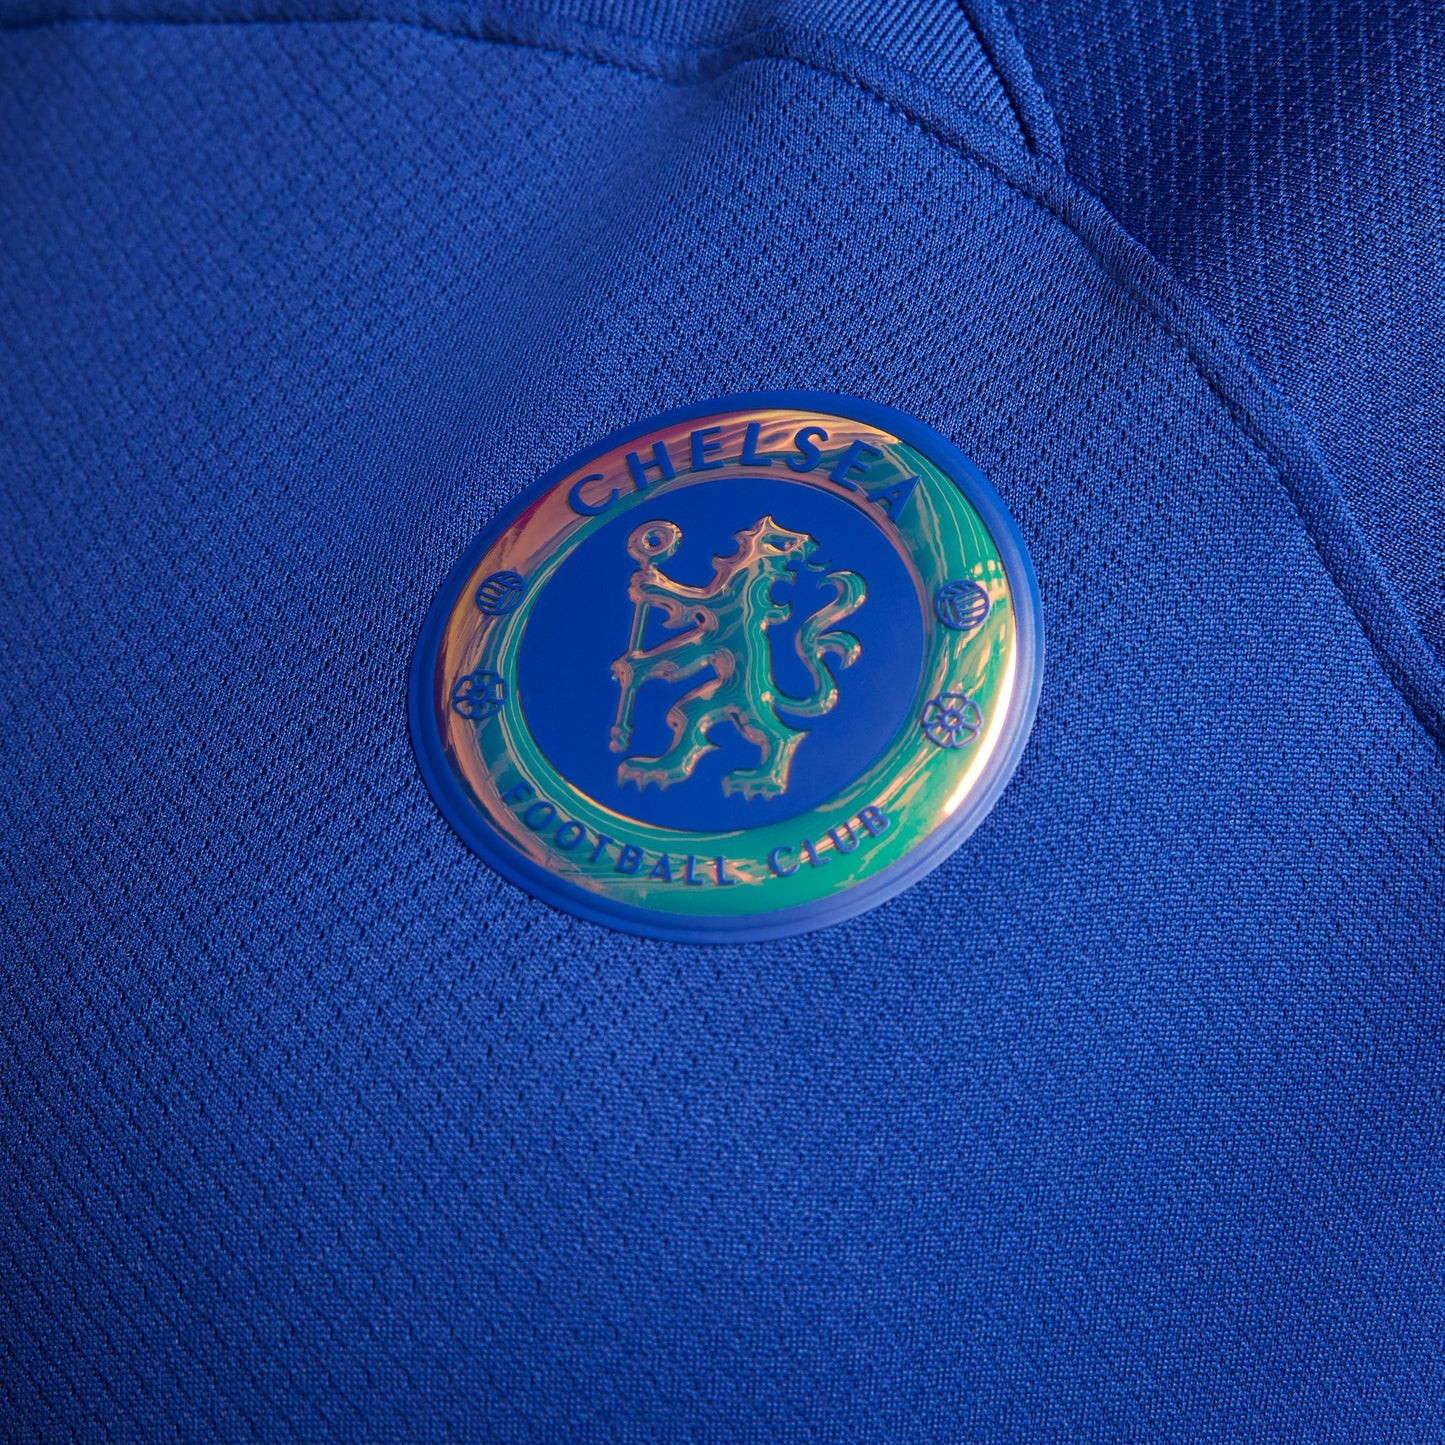 Chelsea Home 23/34 Curved Fit Nike Stadium Shirt